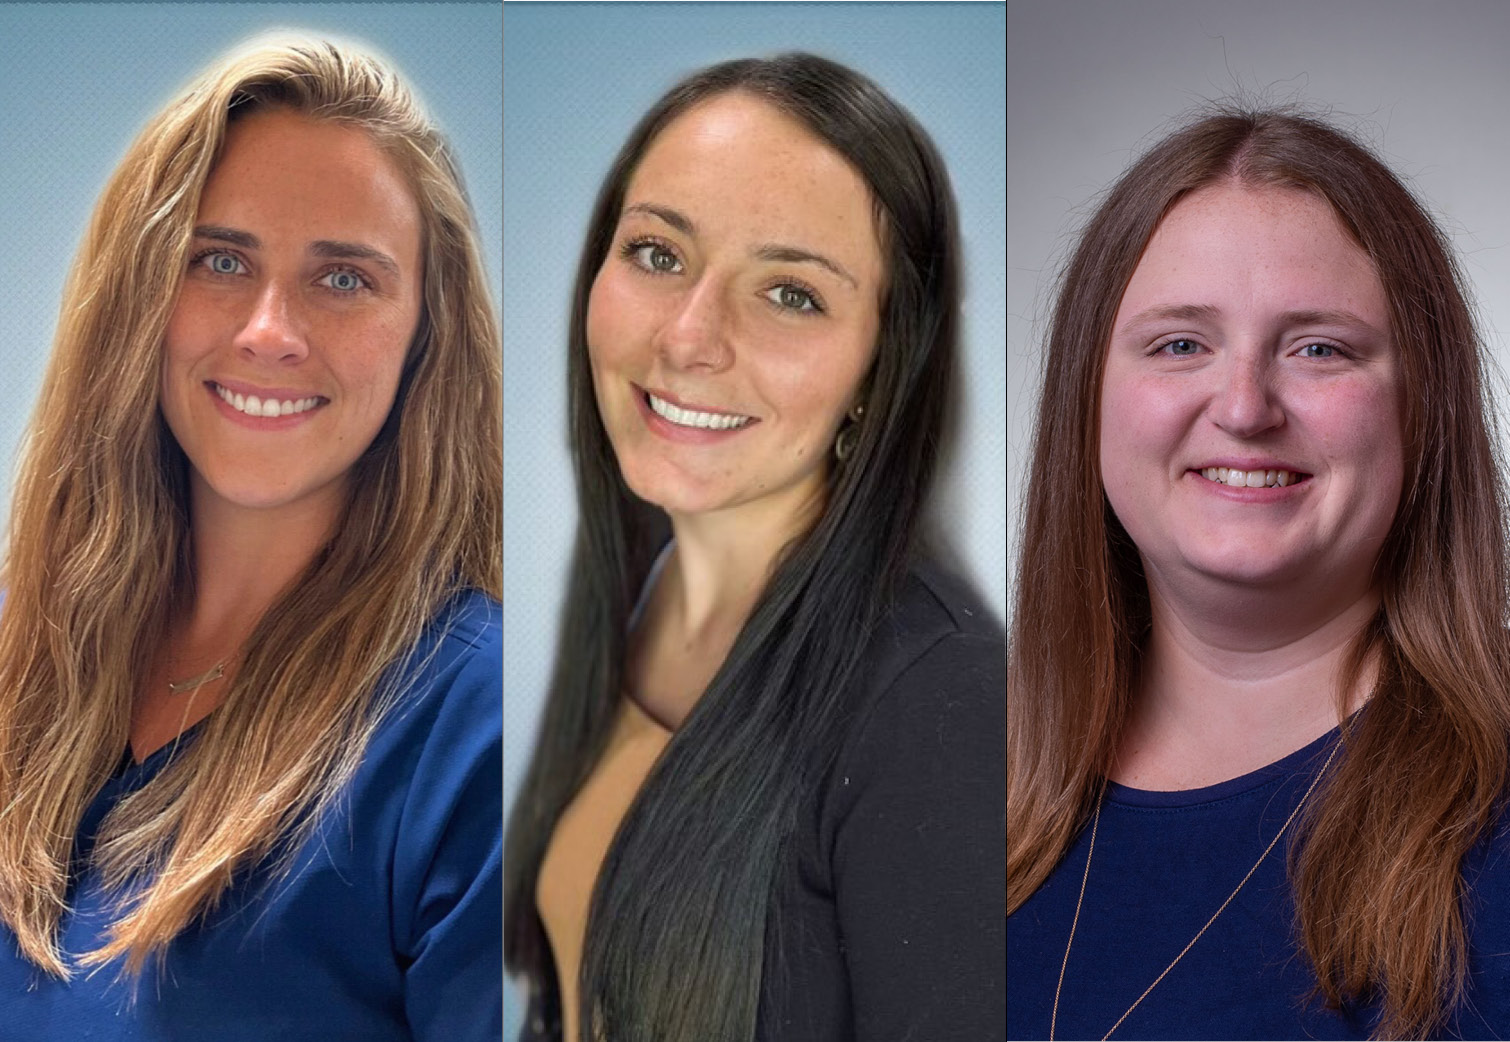 Southwestern Community College announced the volleyball coaching staff, from left: Anna Humburg, Sydney Hildebrand, and Taylor Shipley.